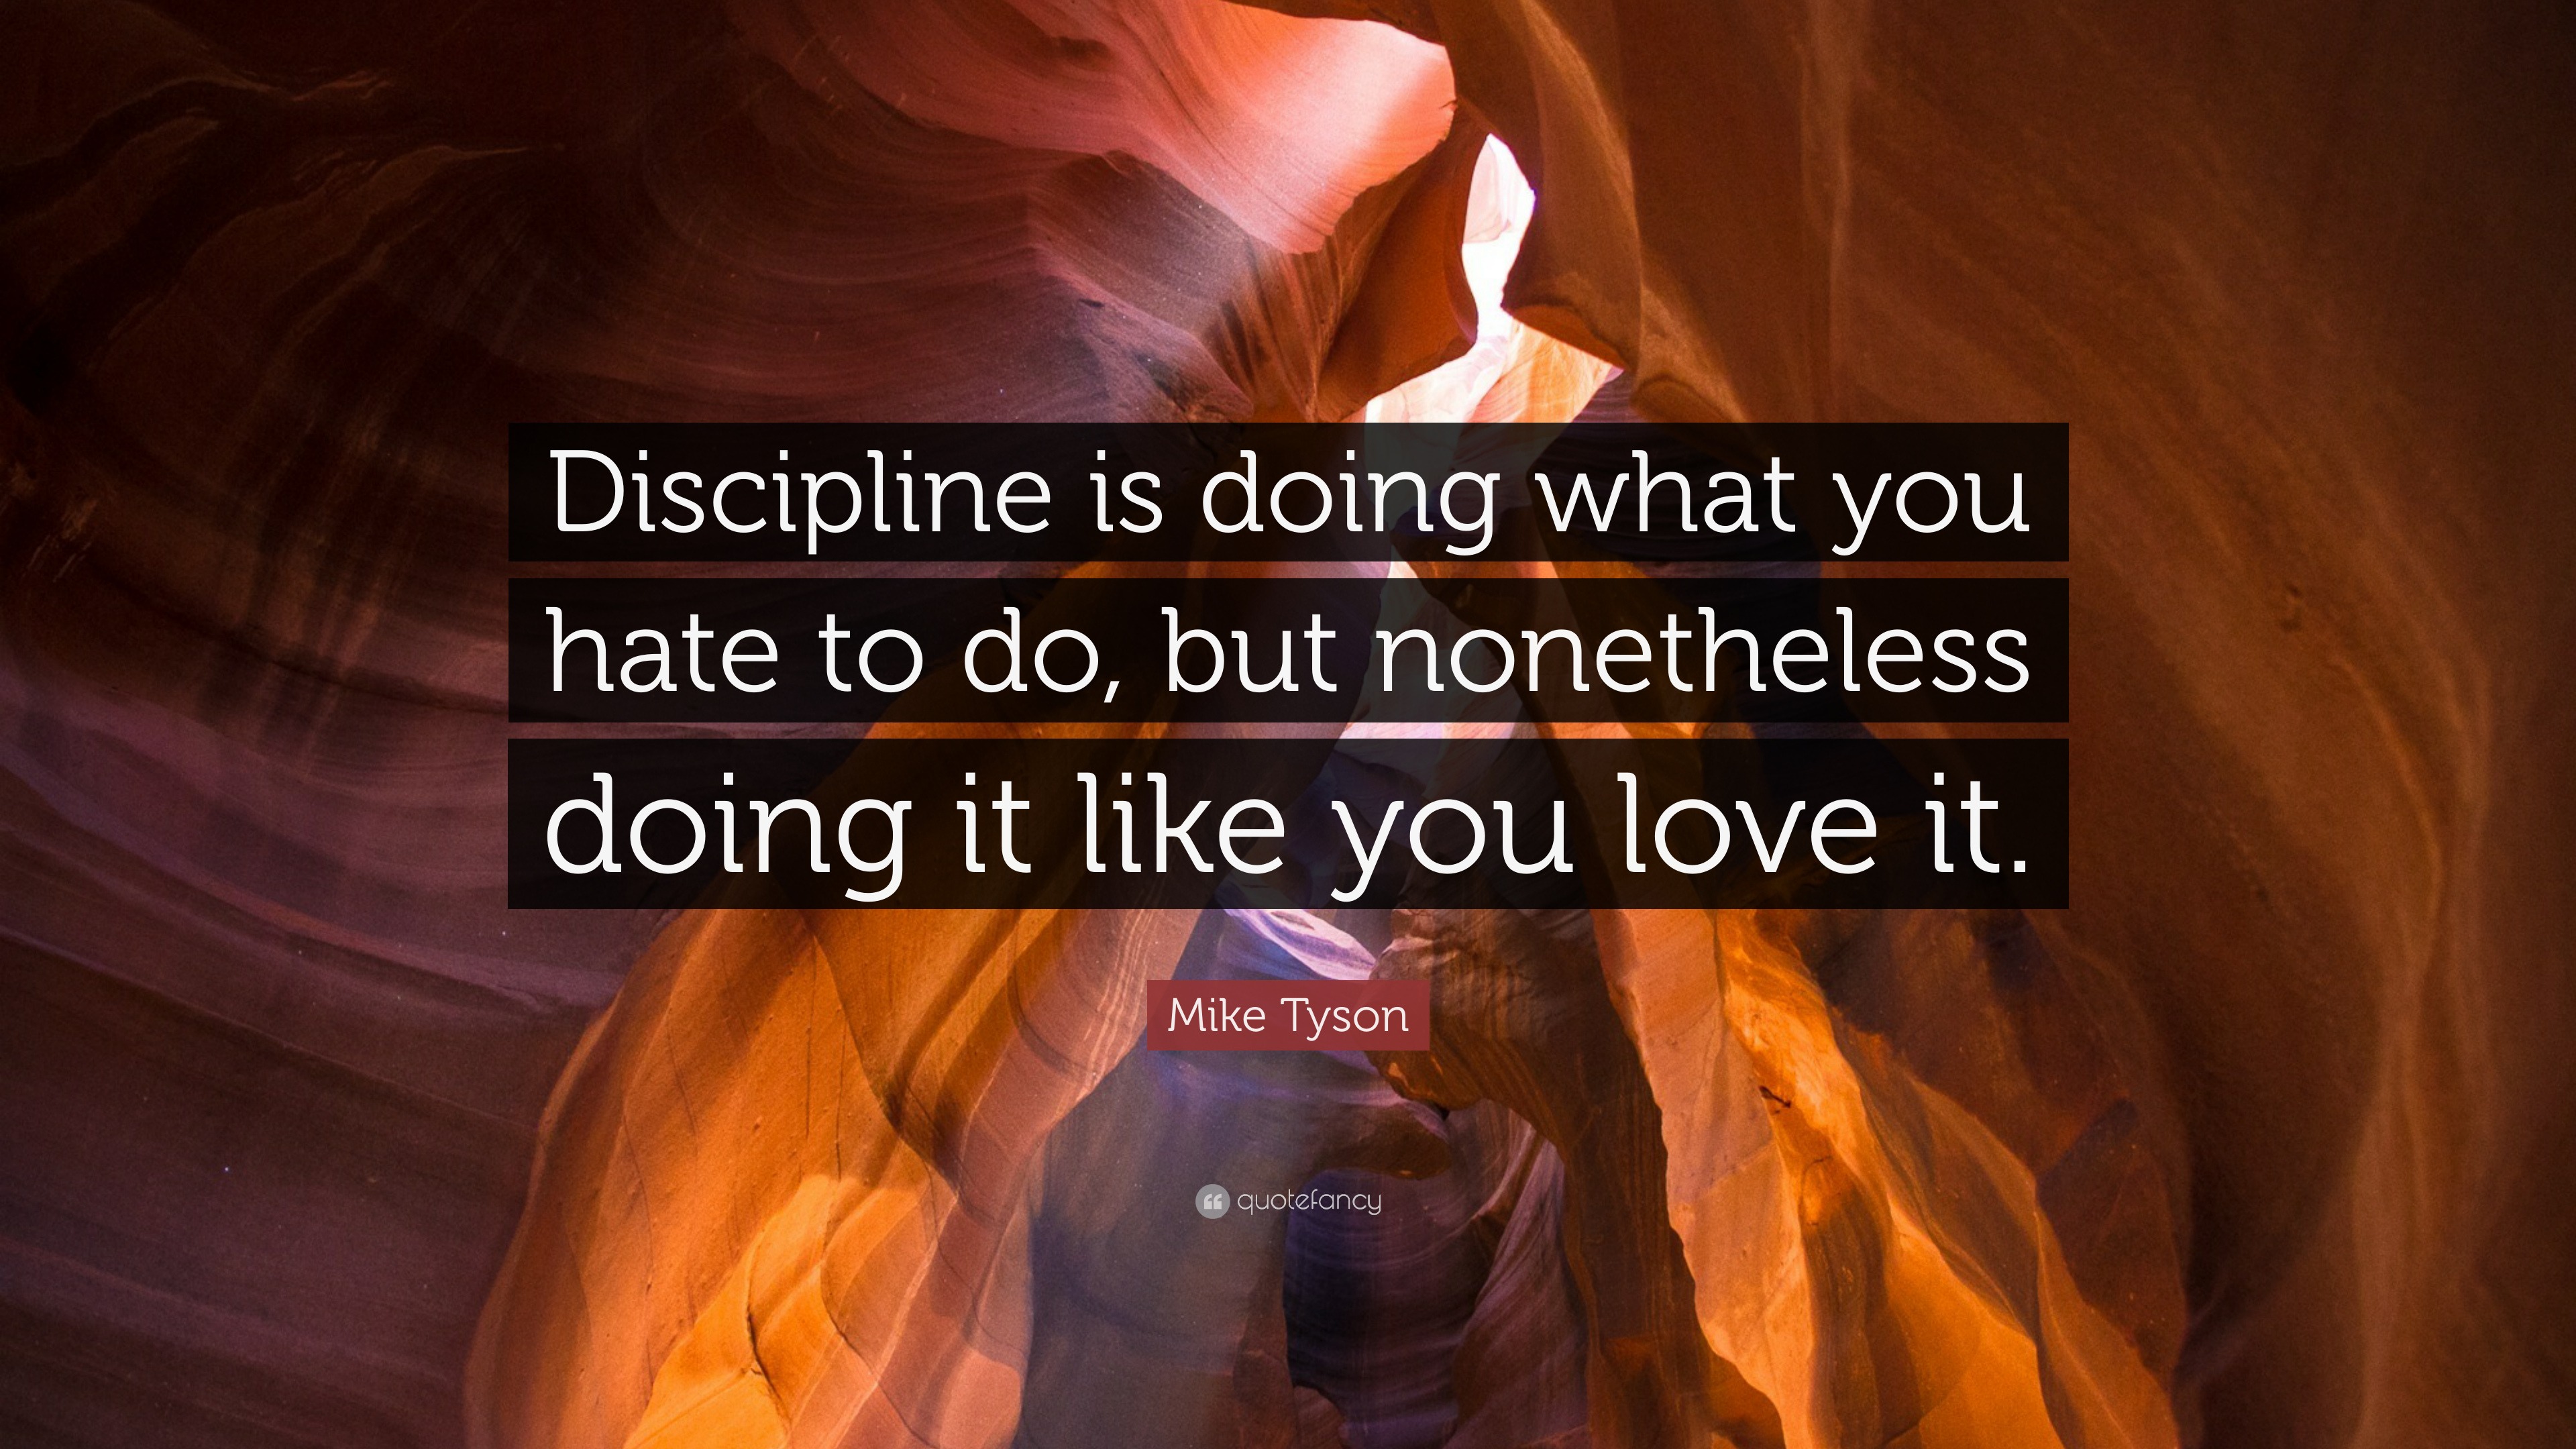 Mike Tyson Quote: “Discipline is doing what you hate to do, but